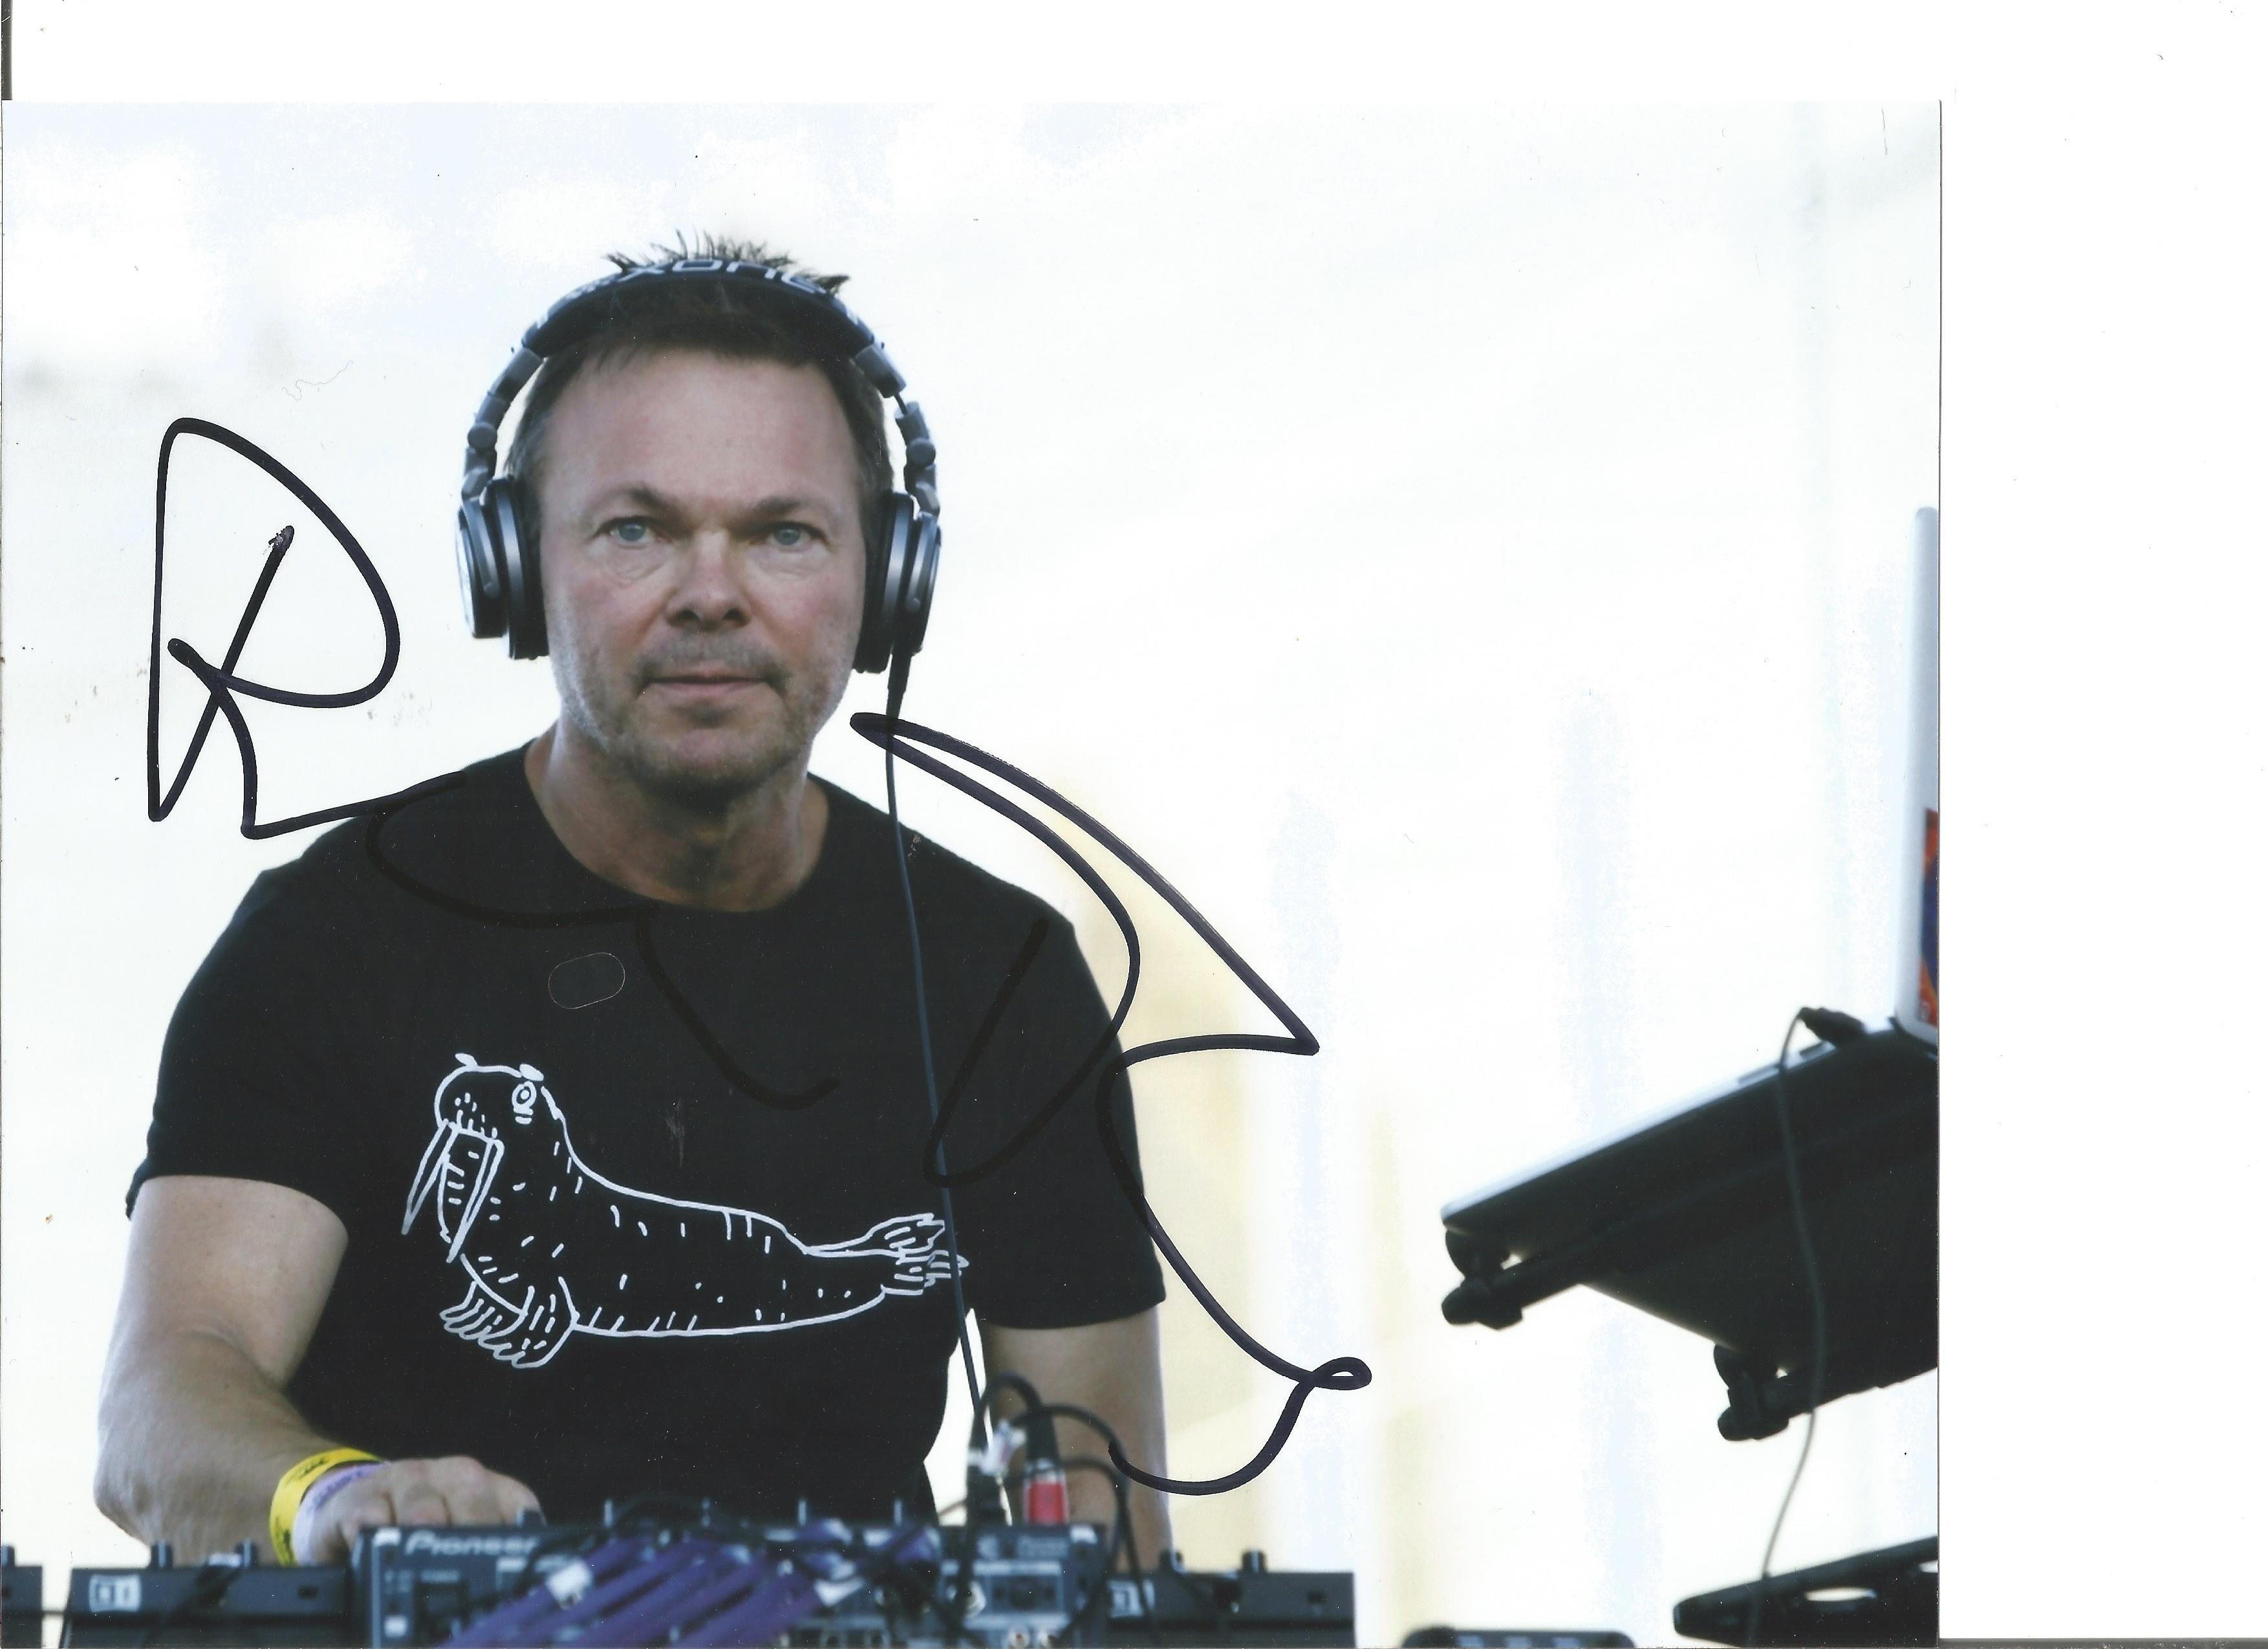 Pete Tong Dj Signed 8x10 Photo. Good Condition. We combine postage on multiple winning lots and